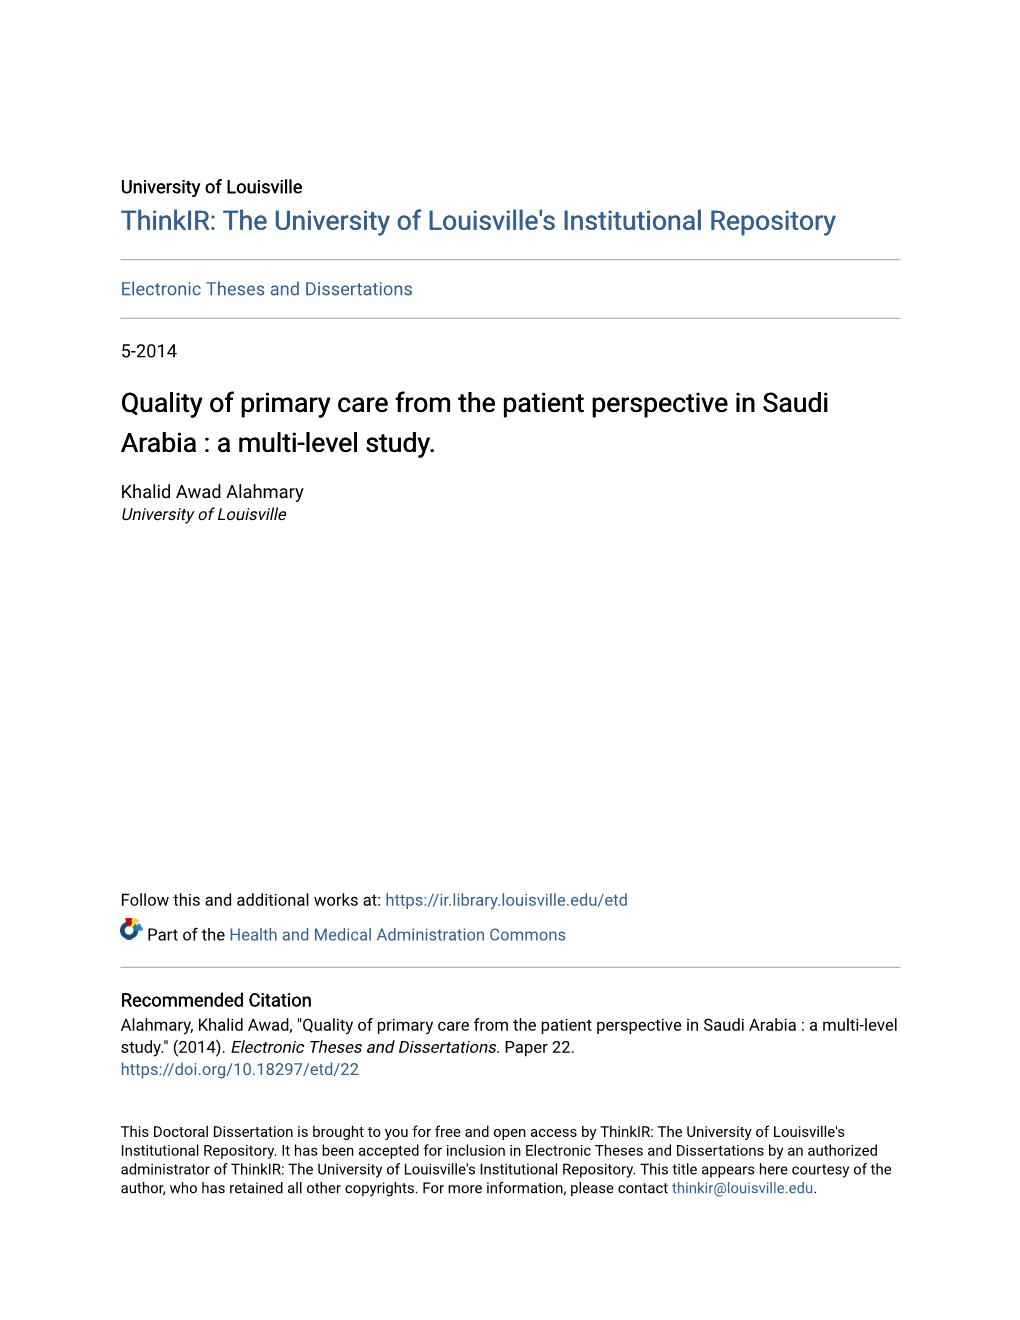 Quality of Primary Care from the Patient Perspective in Saudi Arabia : a Multi-Level Study